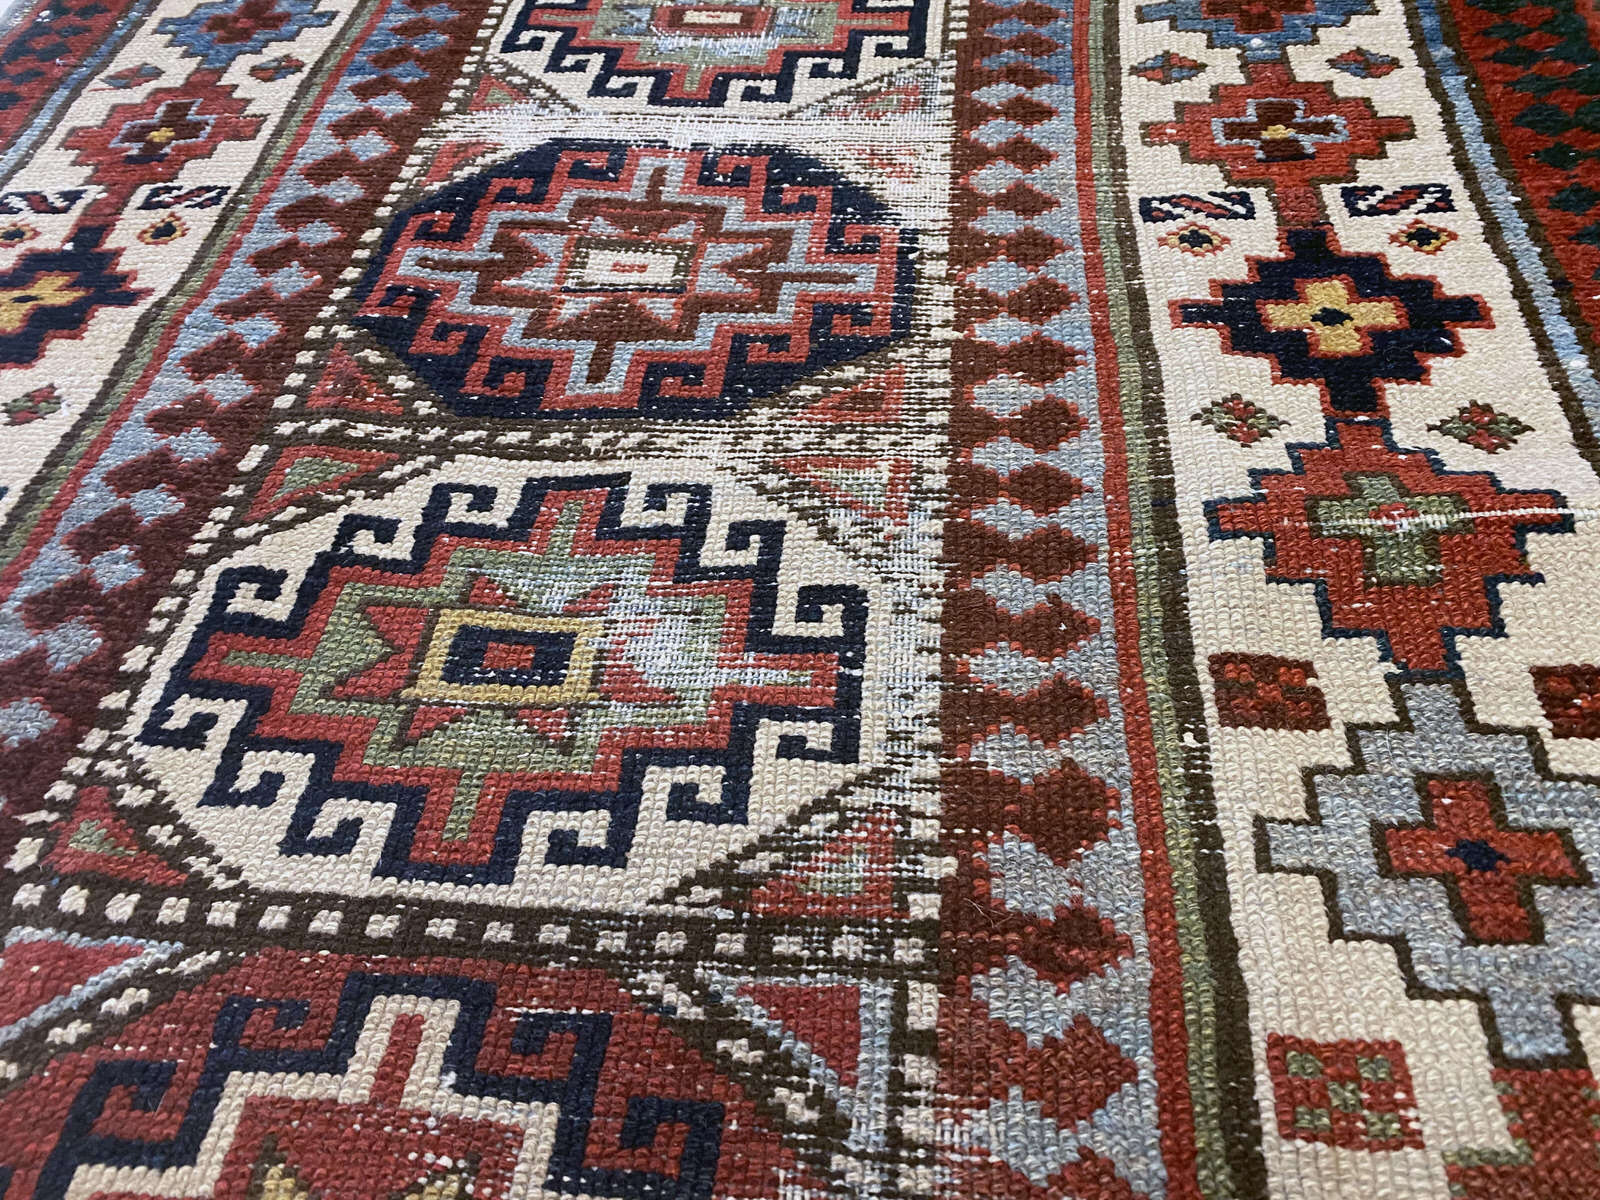 Red and cream Persian rug runner with bright red, blue, green and gold geometric patterns - available from King Kennedy Rugs Los Angeles